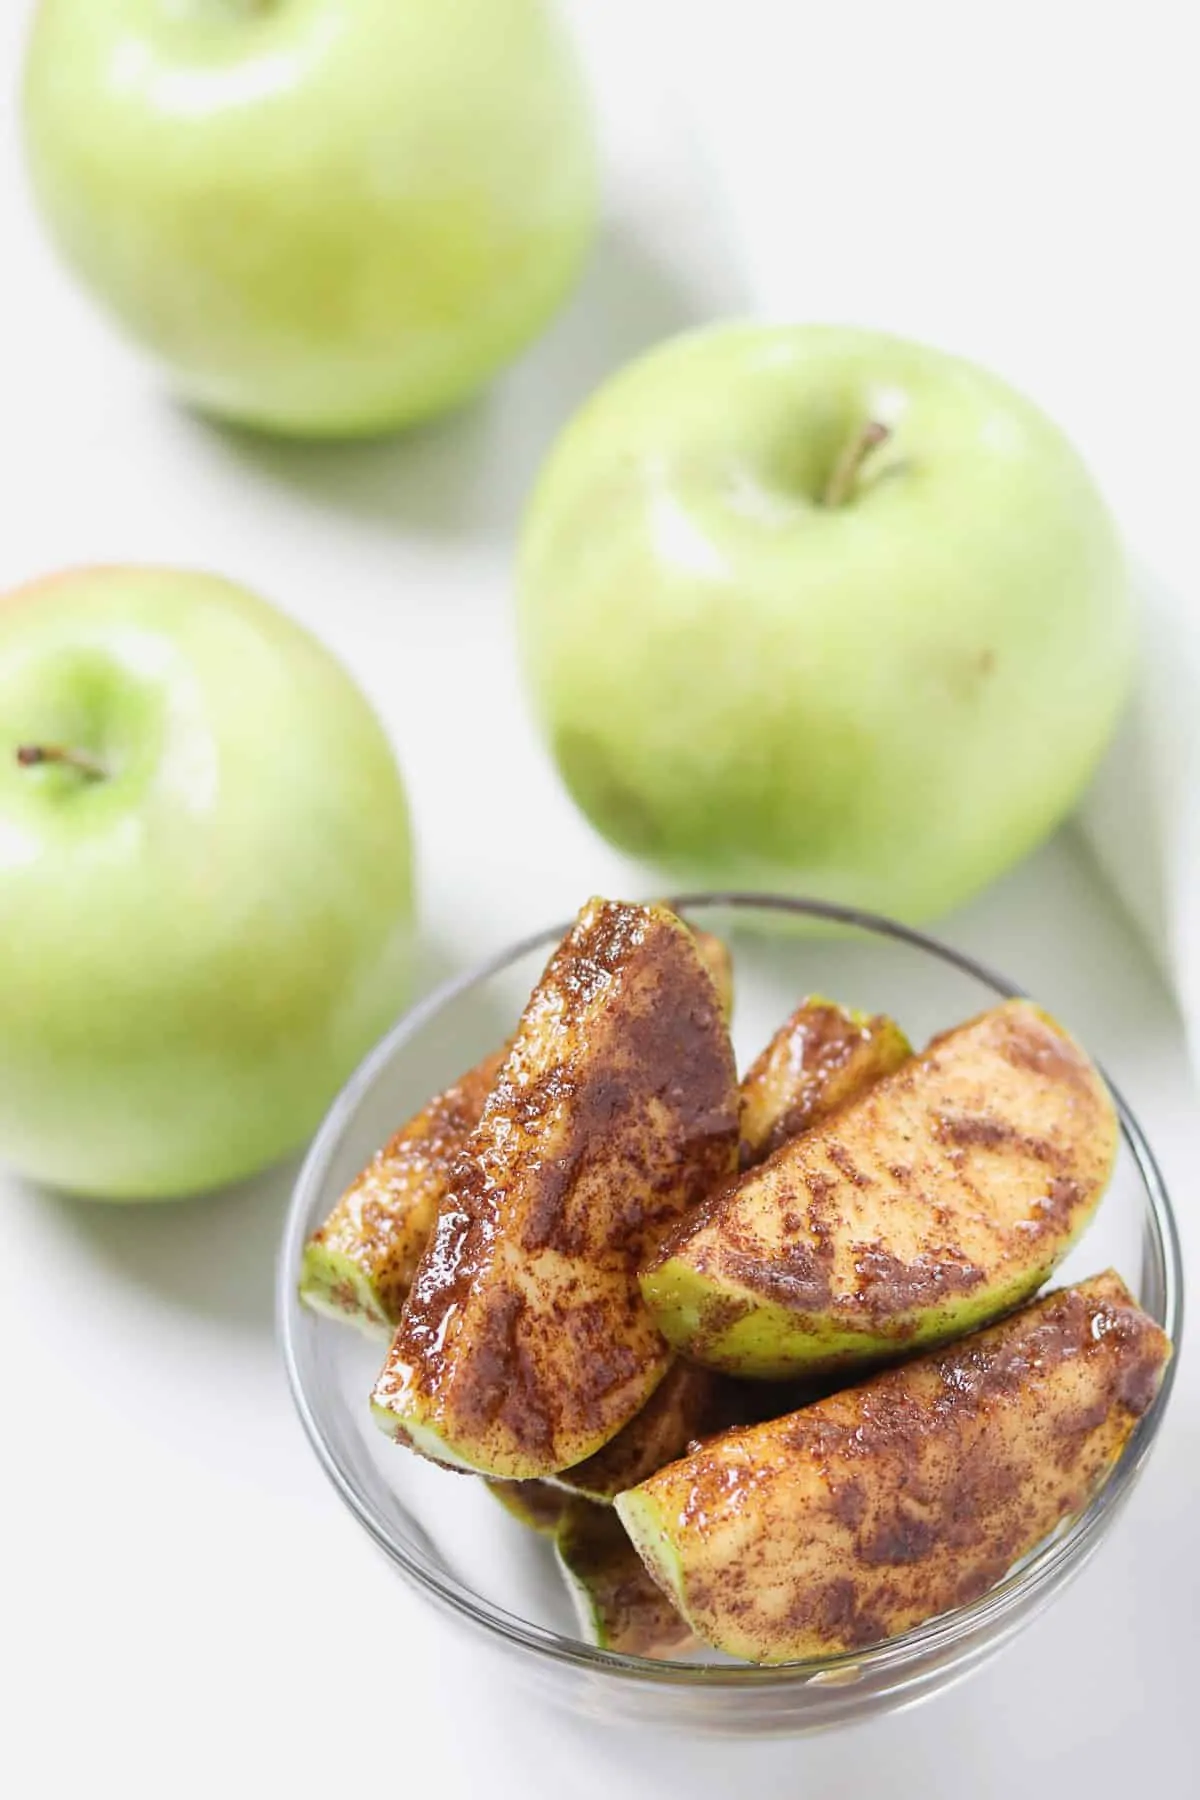 bowl of cinnamon sugar apple slices with green apples in the background